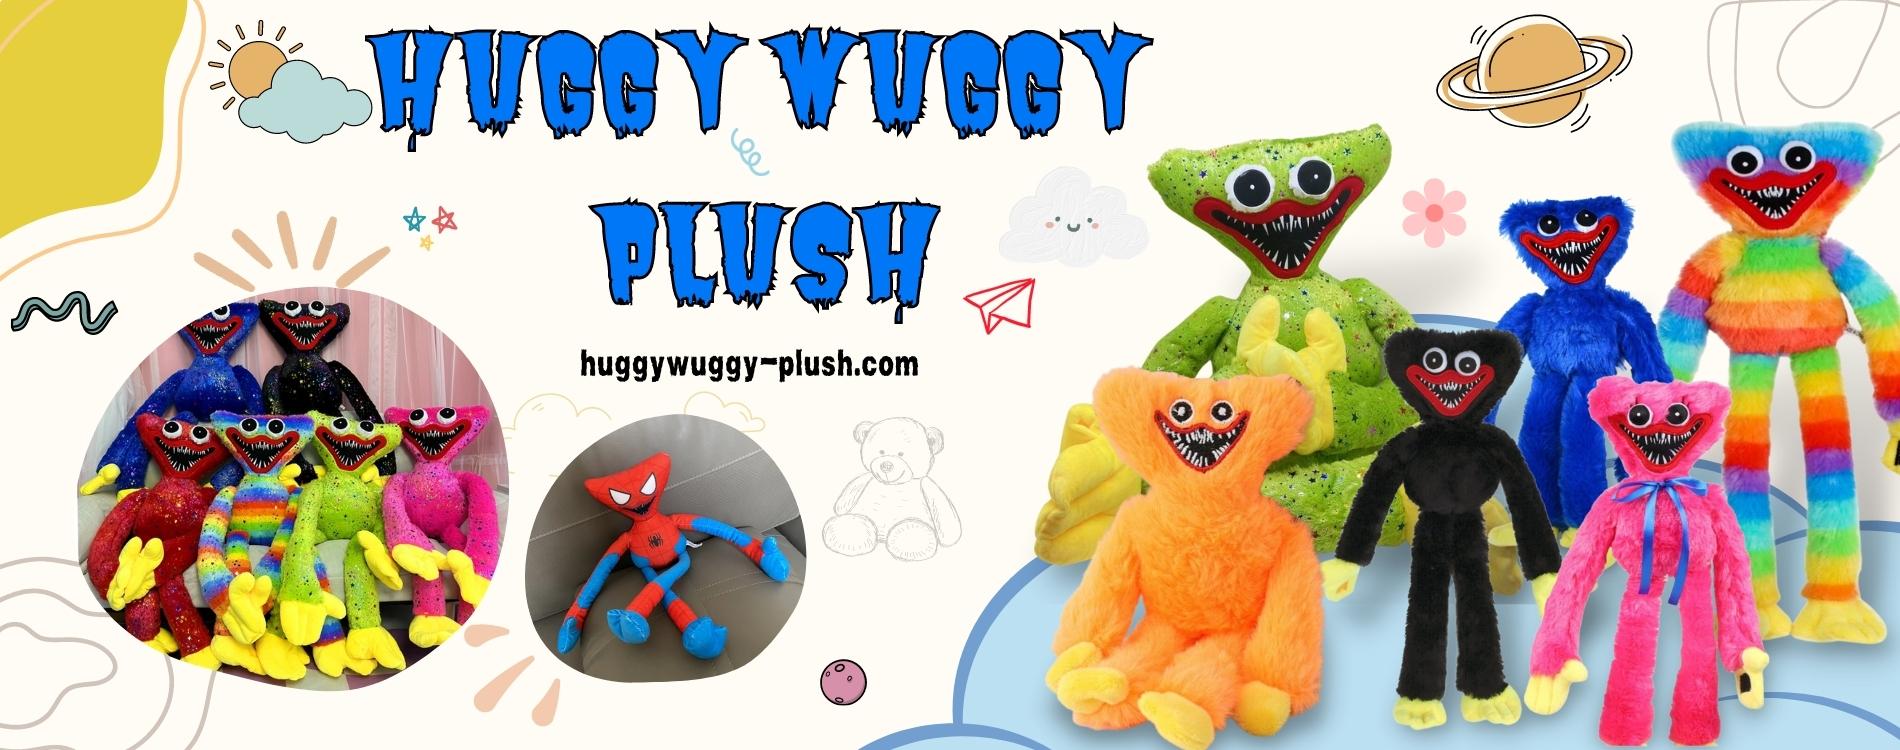 Official Poppy Playtime 14 Smiling/Scary Huggy Wuggy Soft Plush Brand New